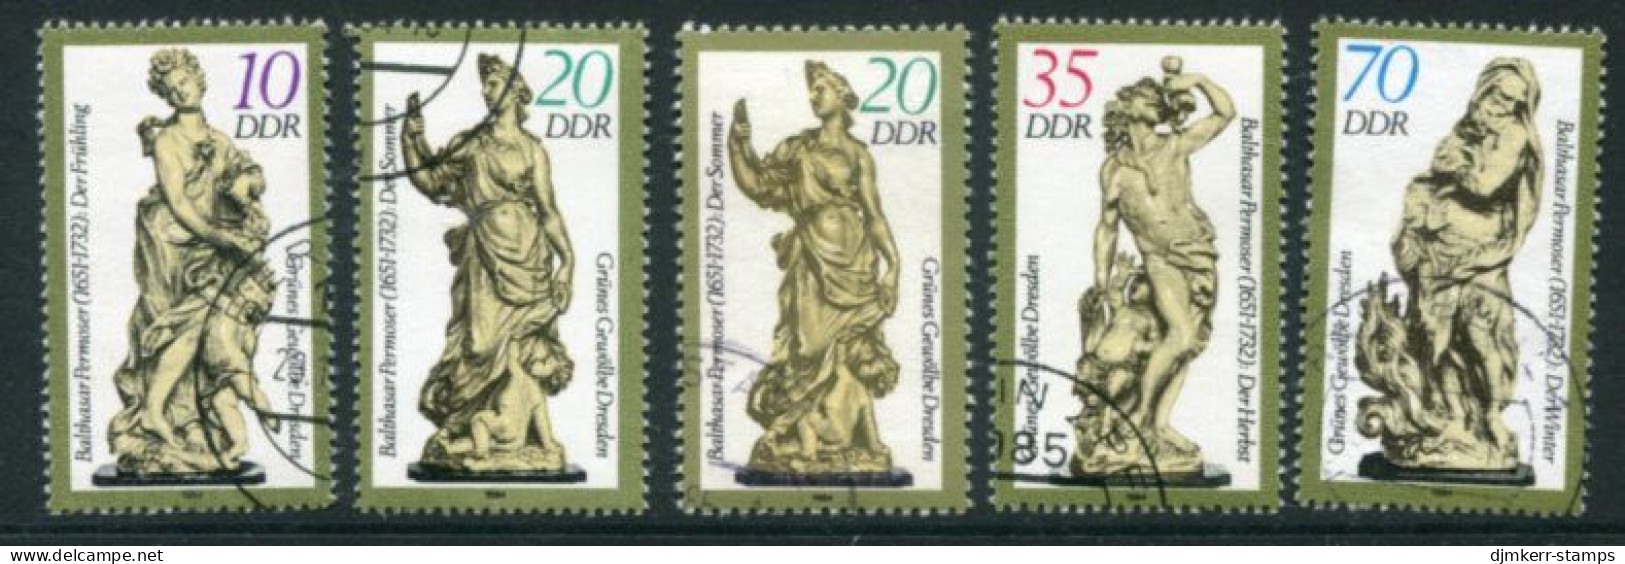 DDR 1984 Statues From The Green Vault With Both 20 Pf. Used.  Michel 2905-08 - Used Stamps